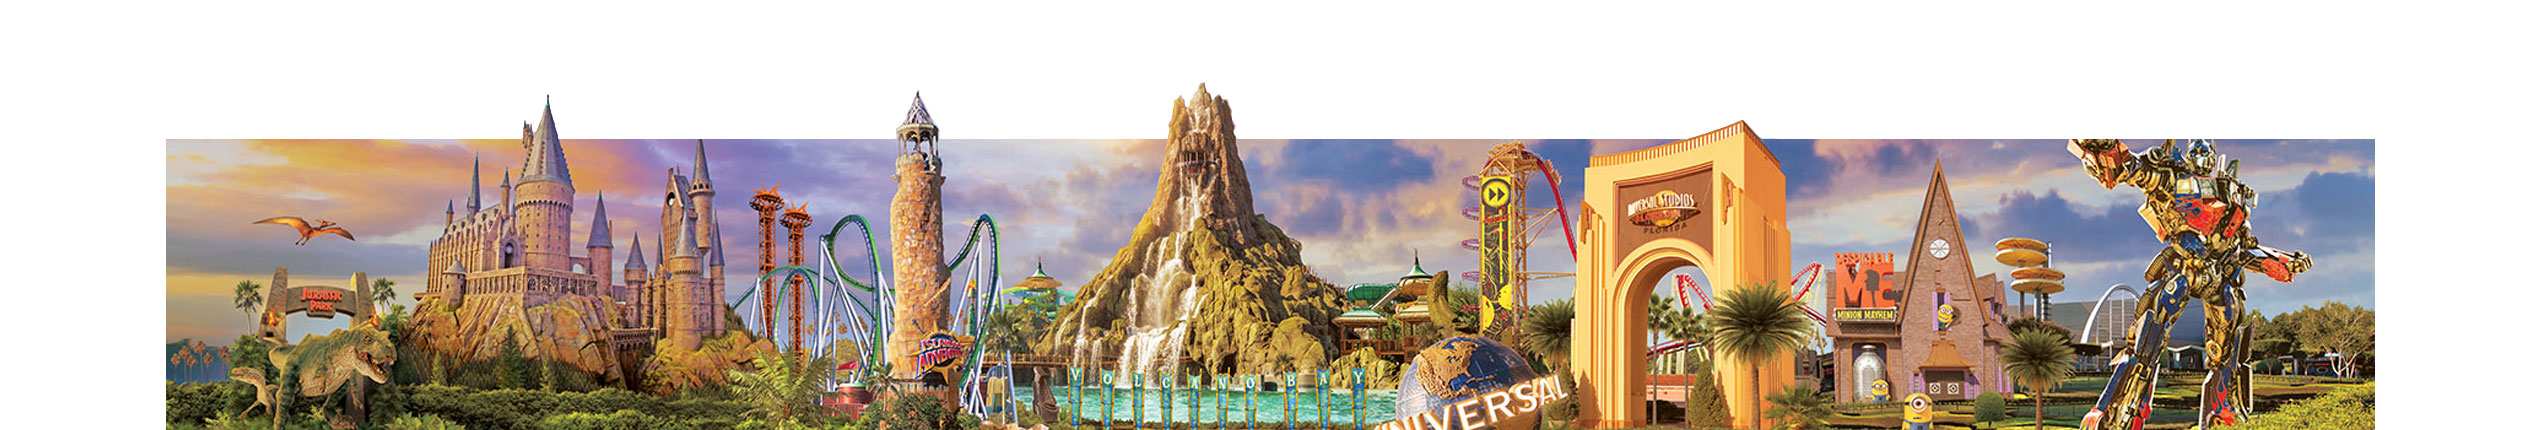 A panoramic view of a theme park or resort (Image #1)